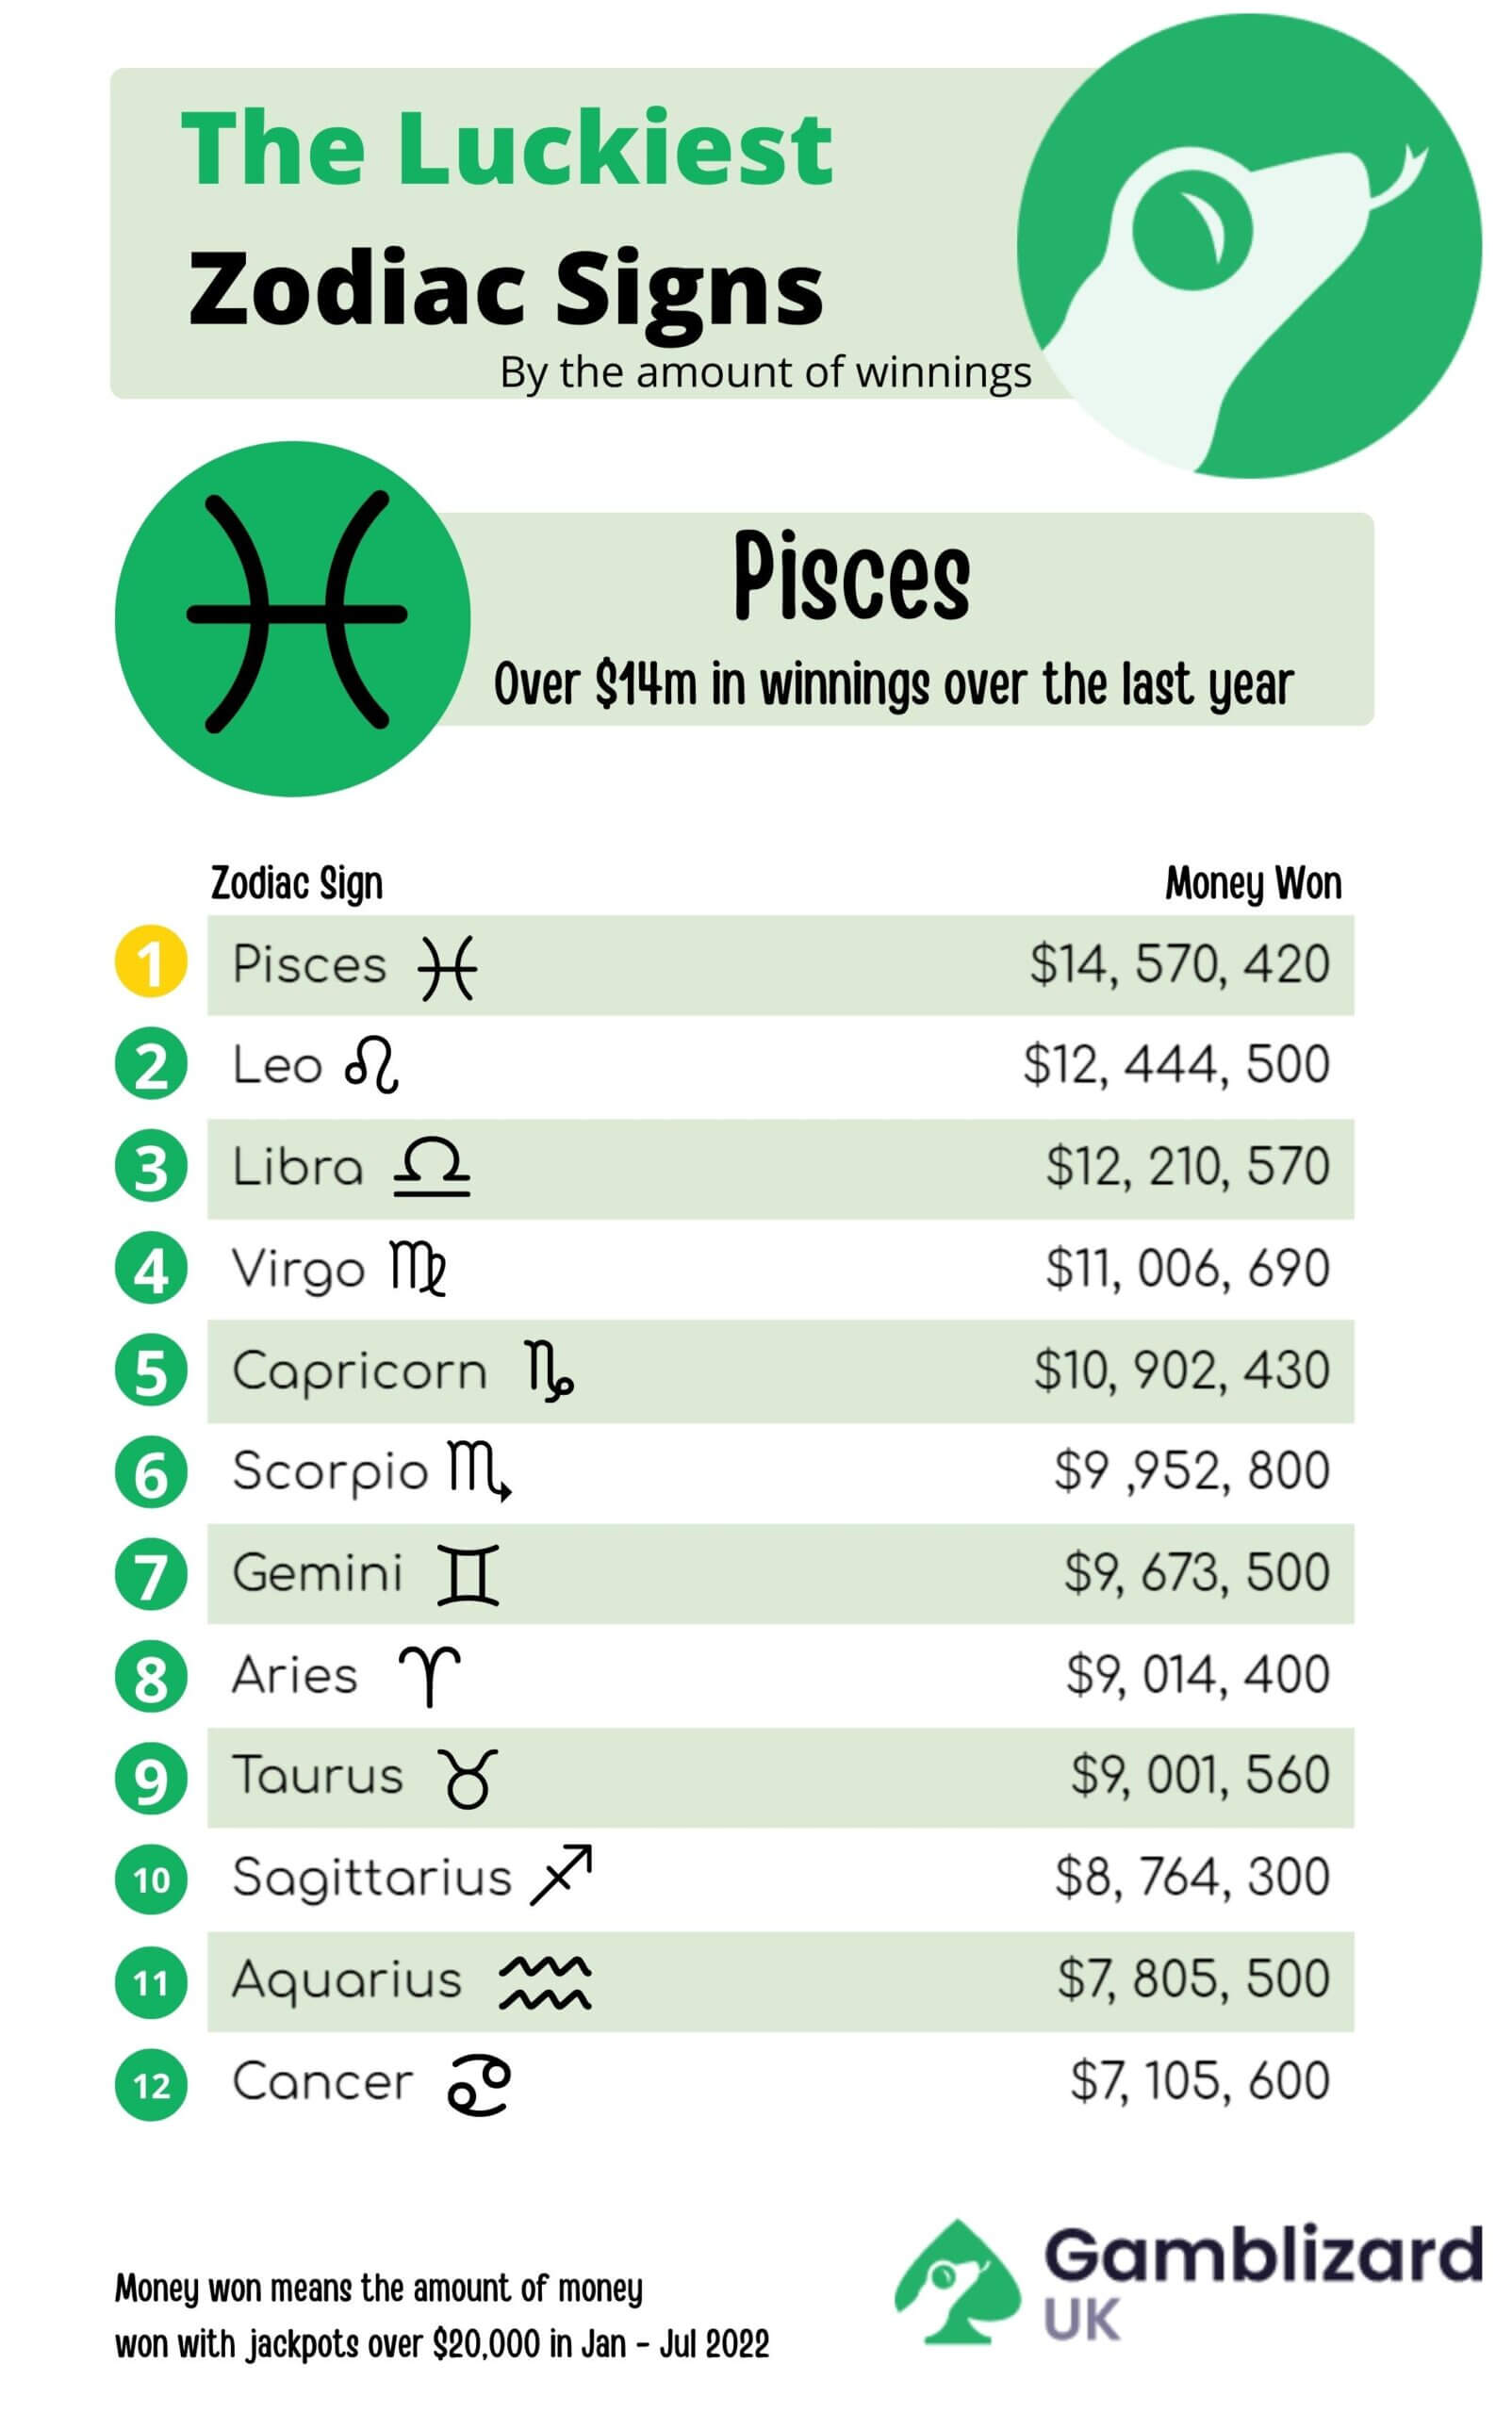 The Luckiest Zodiac Sign by the Amount of Winnings